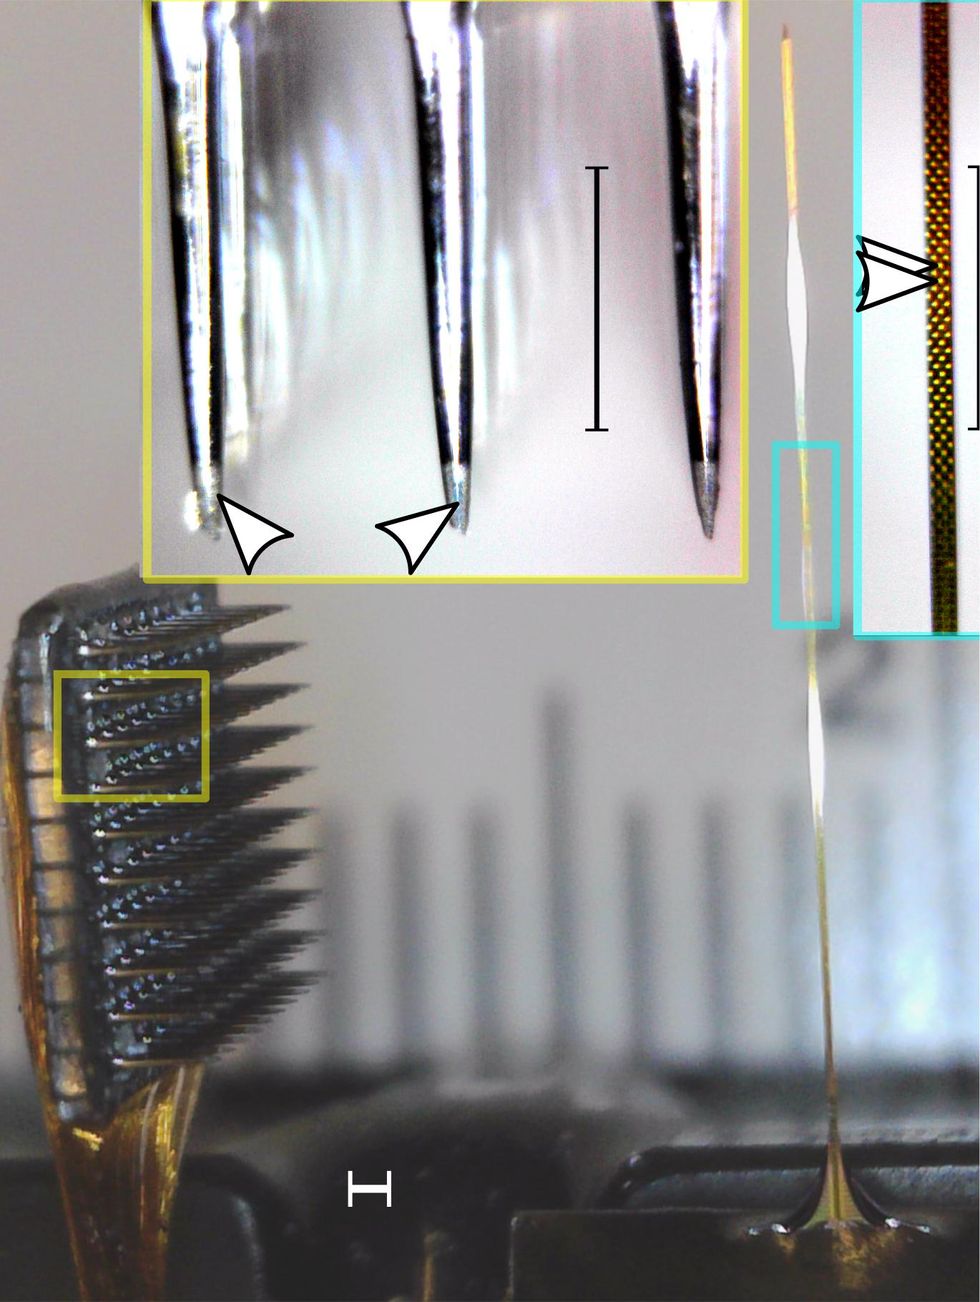 A closeup image compares two tiny metal devices. The device on the left has a rectangular metal base with many rows of tiny spikes poking out. A yellow box superimposed over the device indicates a further zoom-in; an inset image shows the points of the spikes with arrows pointing toward their tips. The device on the right is a single long metal shaft that stretches from the top of the image to the bottom. A blue box superimposed over the device indicates a further zoom-in; an inset image shows a portion of the long shank with arrows pointing to the checkerboard pattern on its surface.